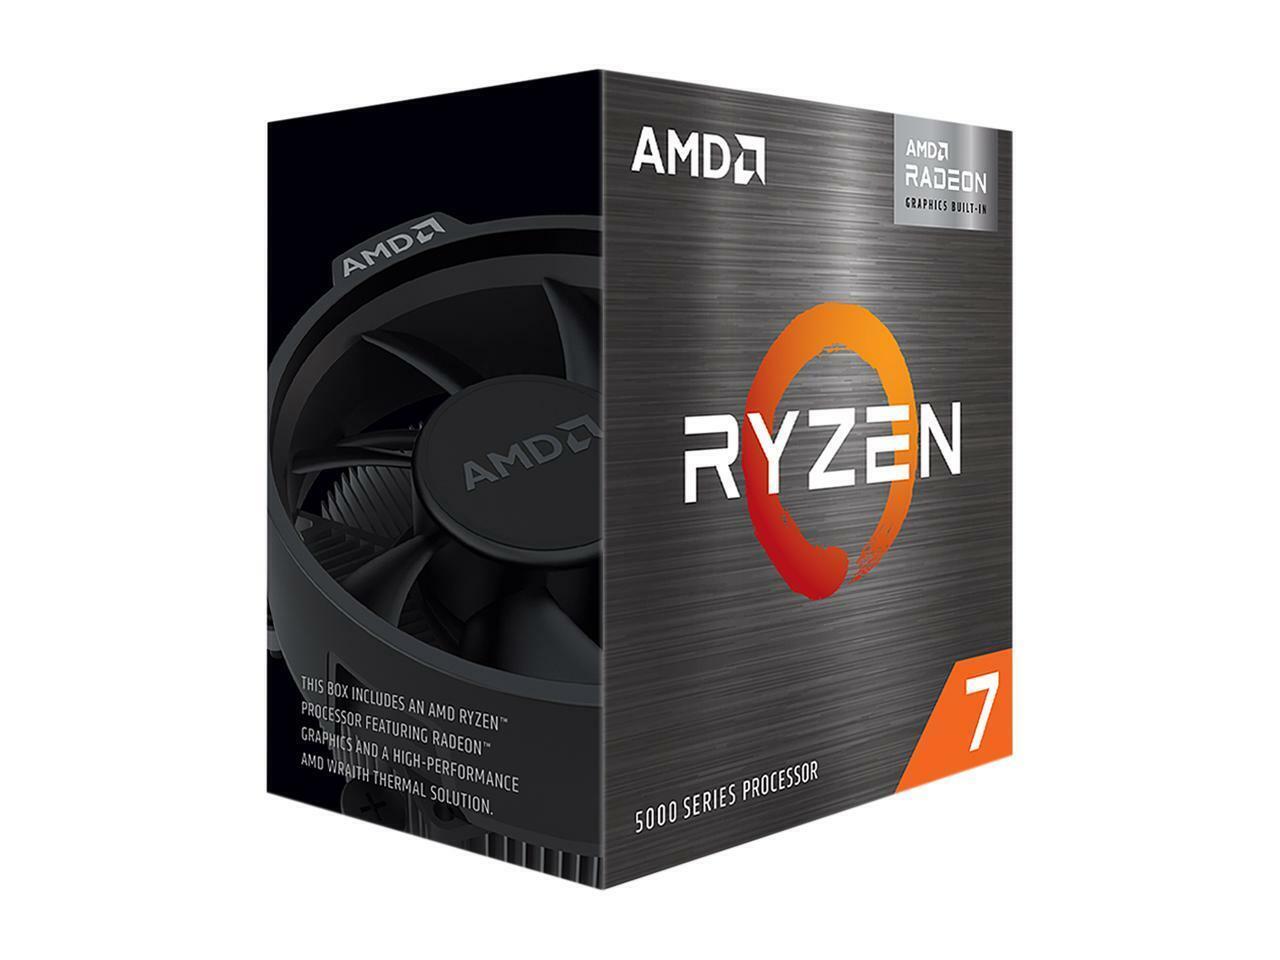 AMD Ryzen 7 5700G 8-Core Desktop Processor with Radeon Vega 8 Graphics, 16-Thread Unlocked for Overclocking, AM4 Socket, 65W TDP - 7nm FinFET Technology - Wraith Stealth Thermal Solution - Windows 10 Compatible